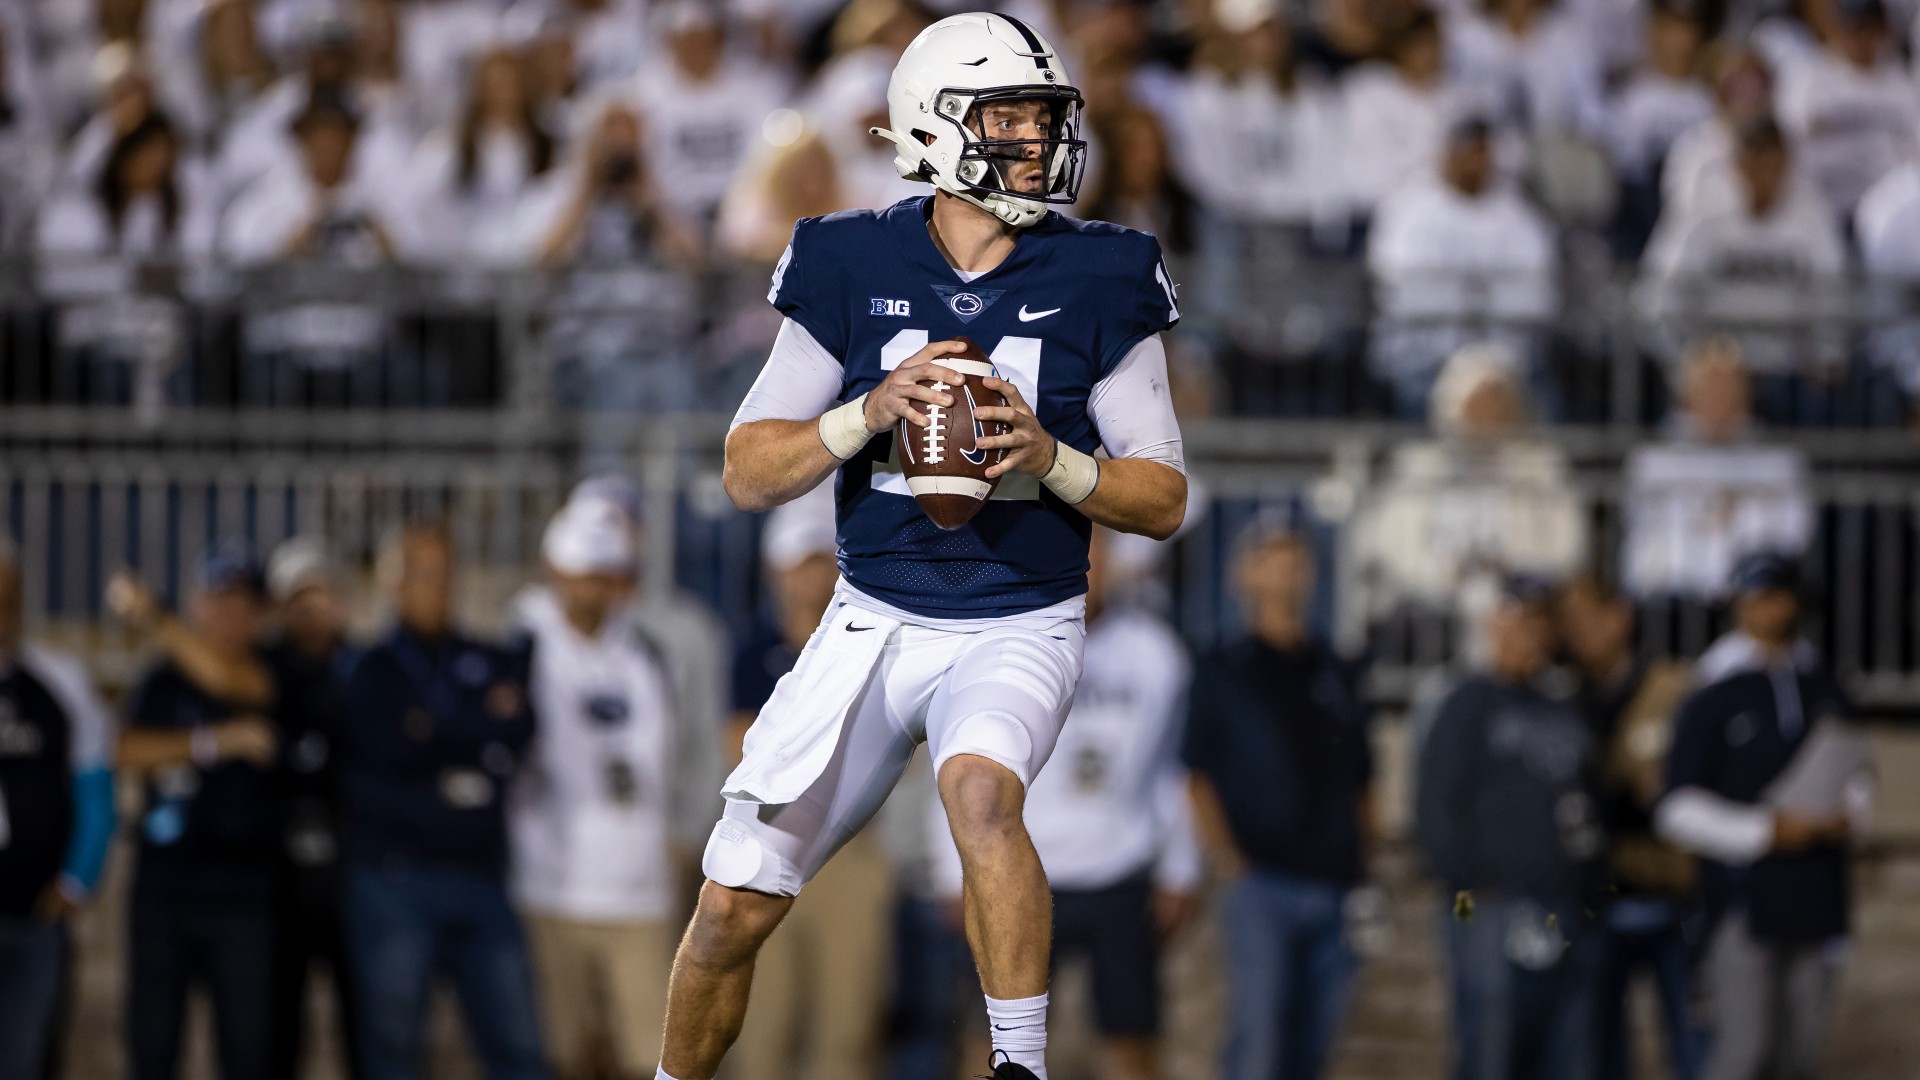 Illinois vs Penn State Prediction & College Football Odds for Week 8